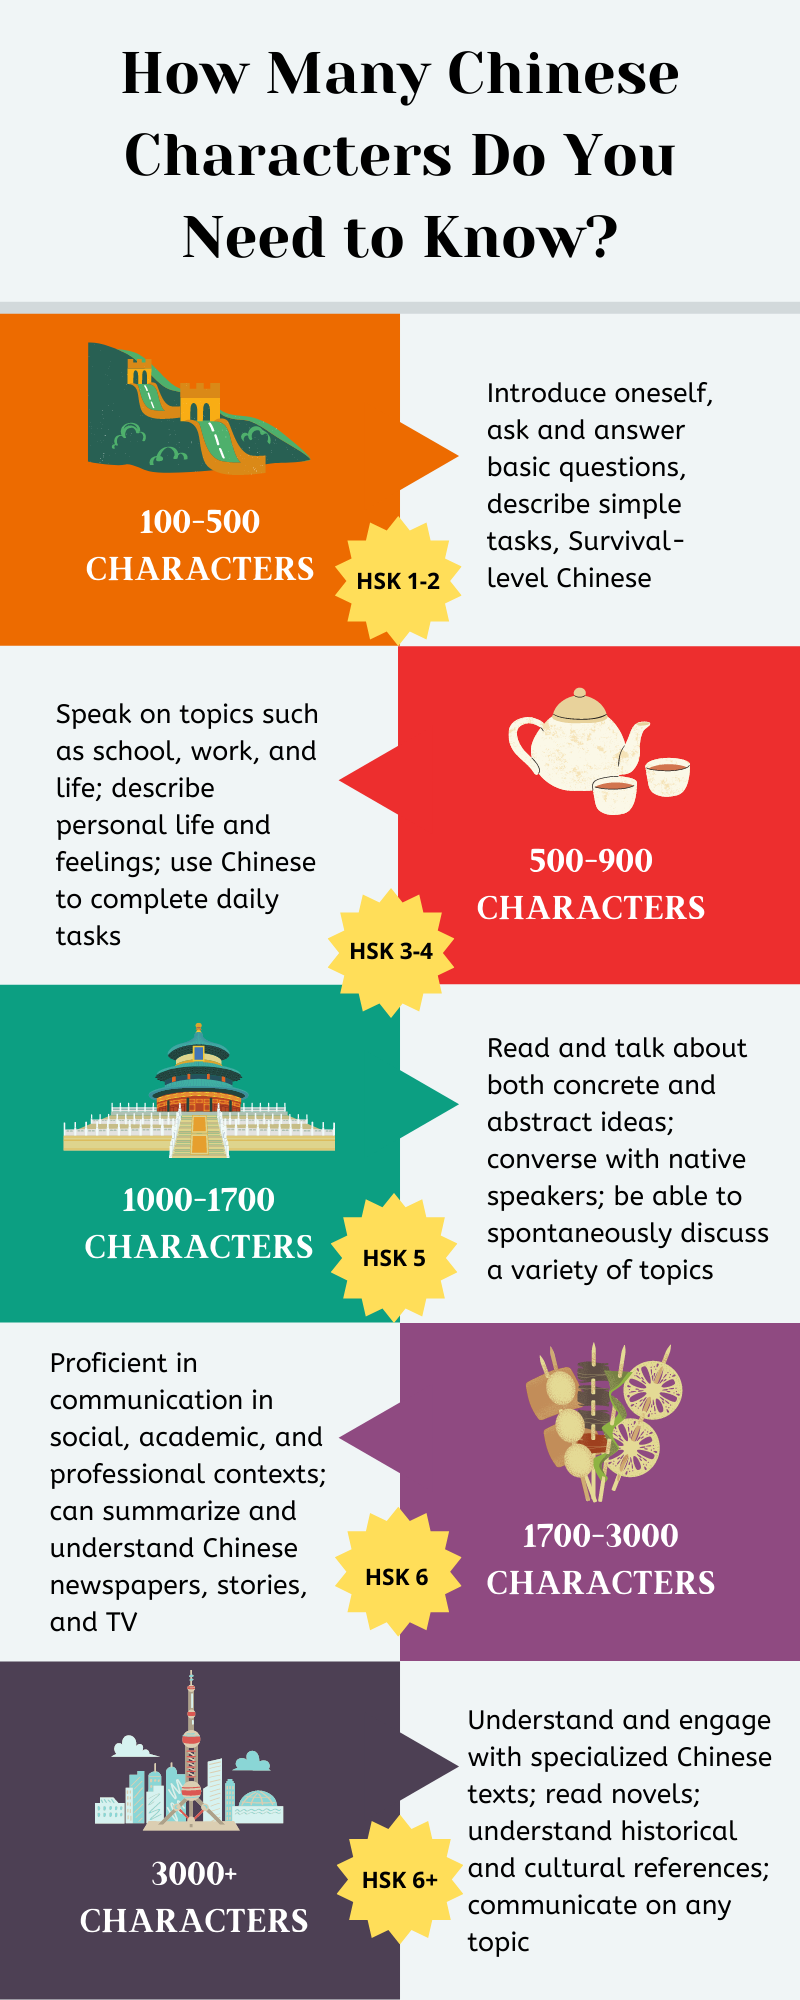 Chinese Learning Books-10 Best Books to Learn Chinese